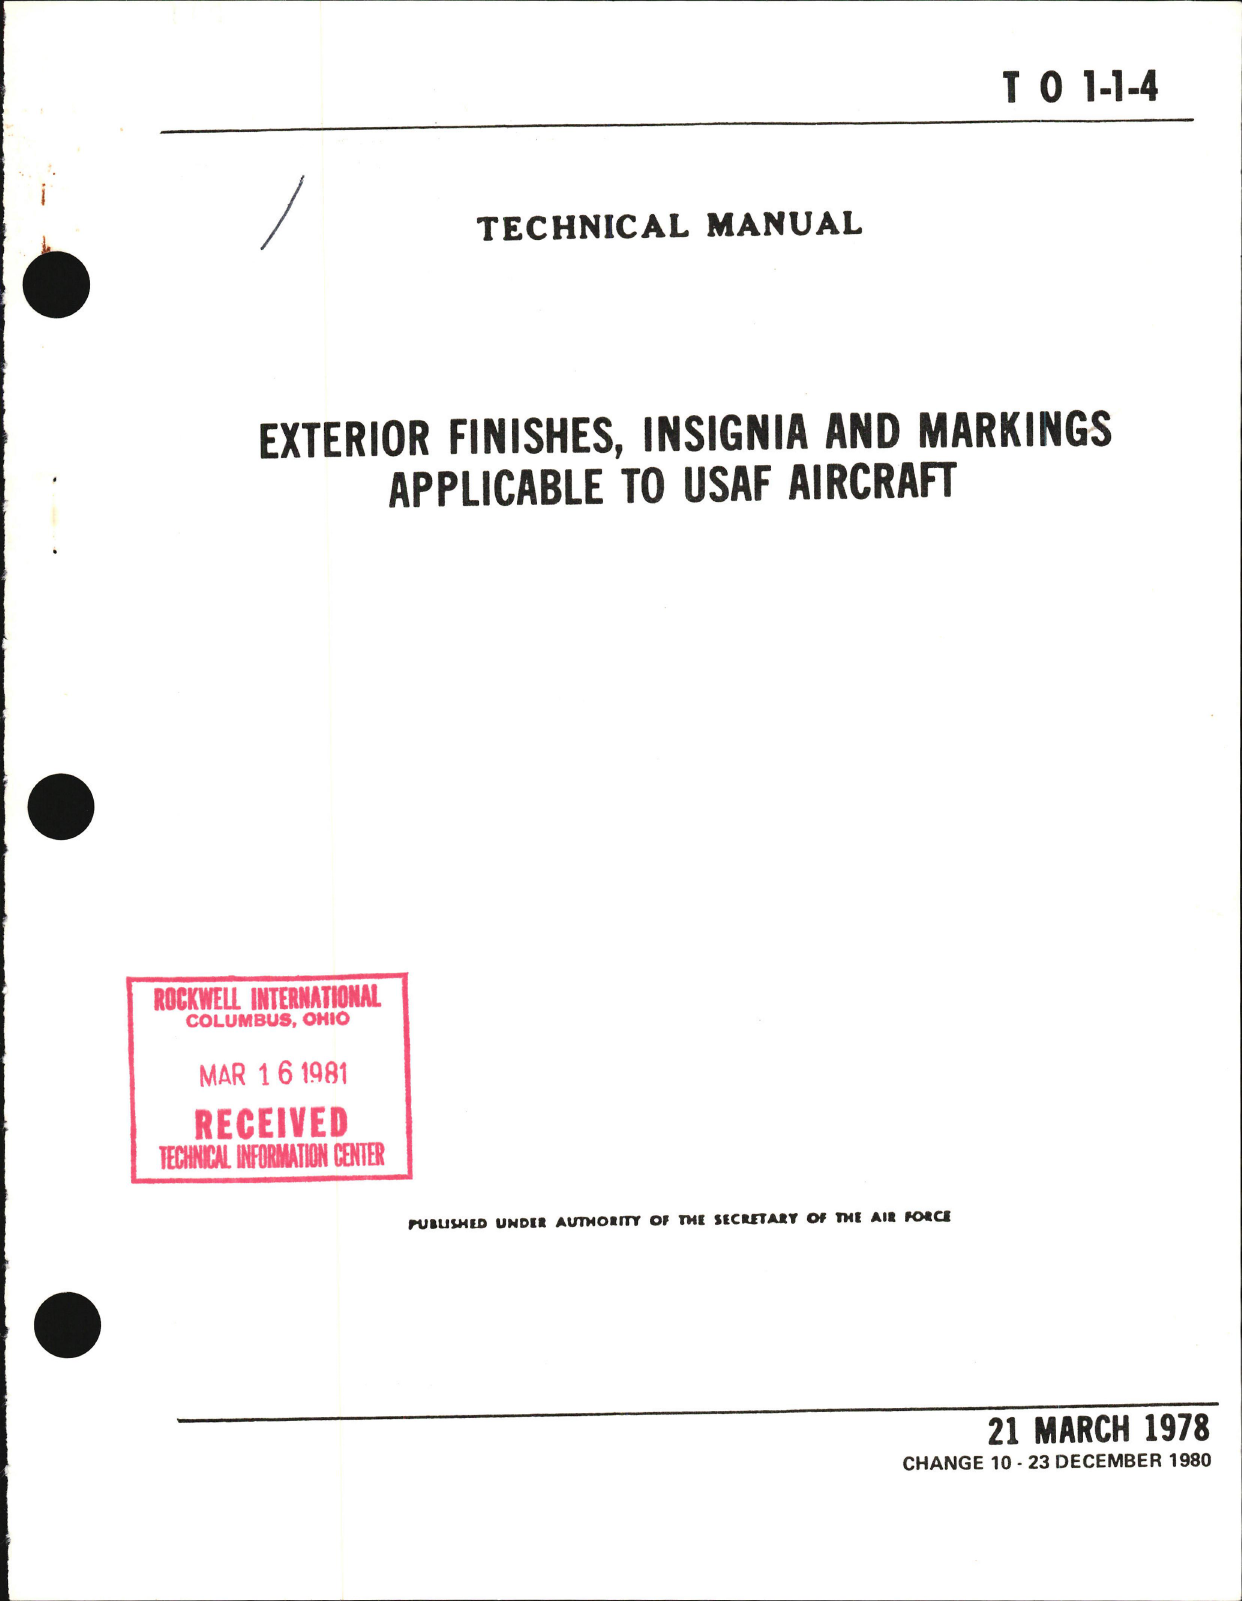 Sample page 1 from AirCorps Library document: Exterior Finishes, Insignia and Markings for USAF Aircraft - Change - 10